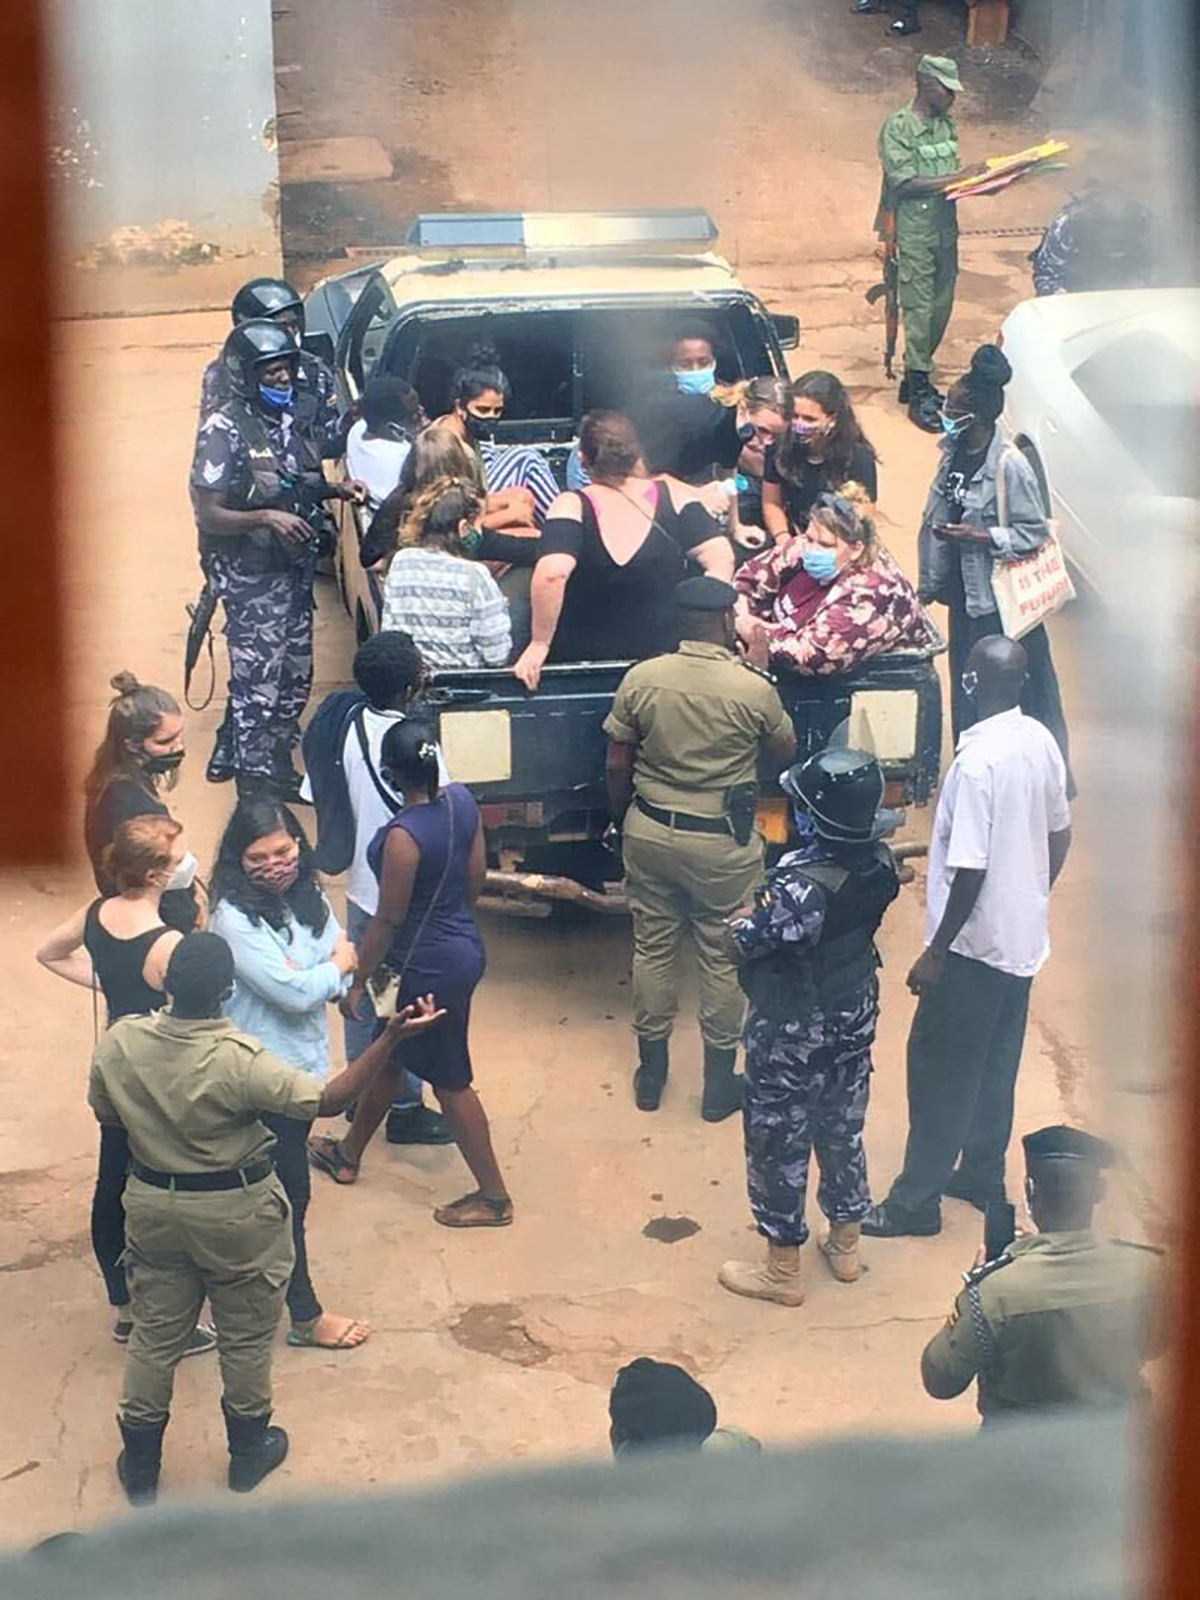 PHOTO: Protesters are arrested and placed in the back of a police truck during an anti-racism demonstration in Kampala, Uganda, on June 9, 2020.